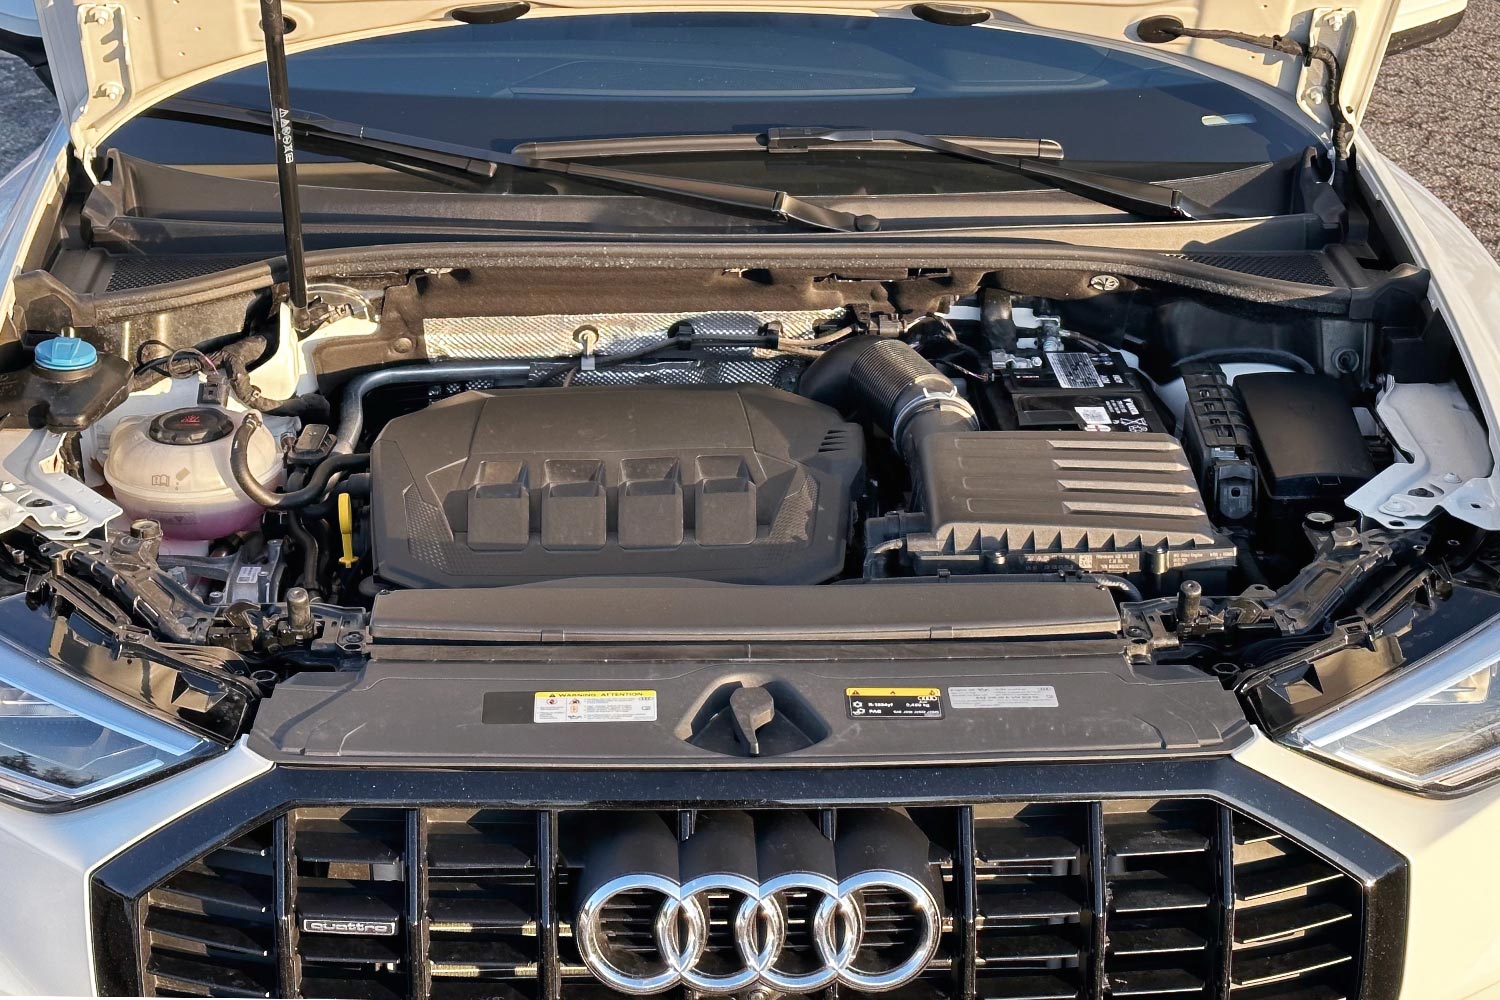 The engine compartment of an Audi Q3.